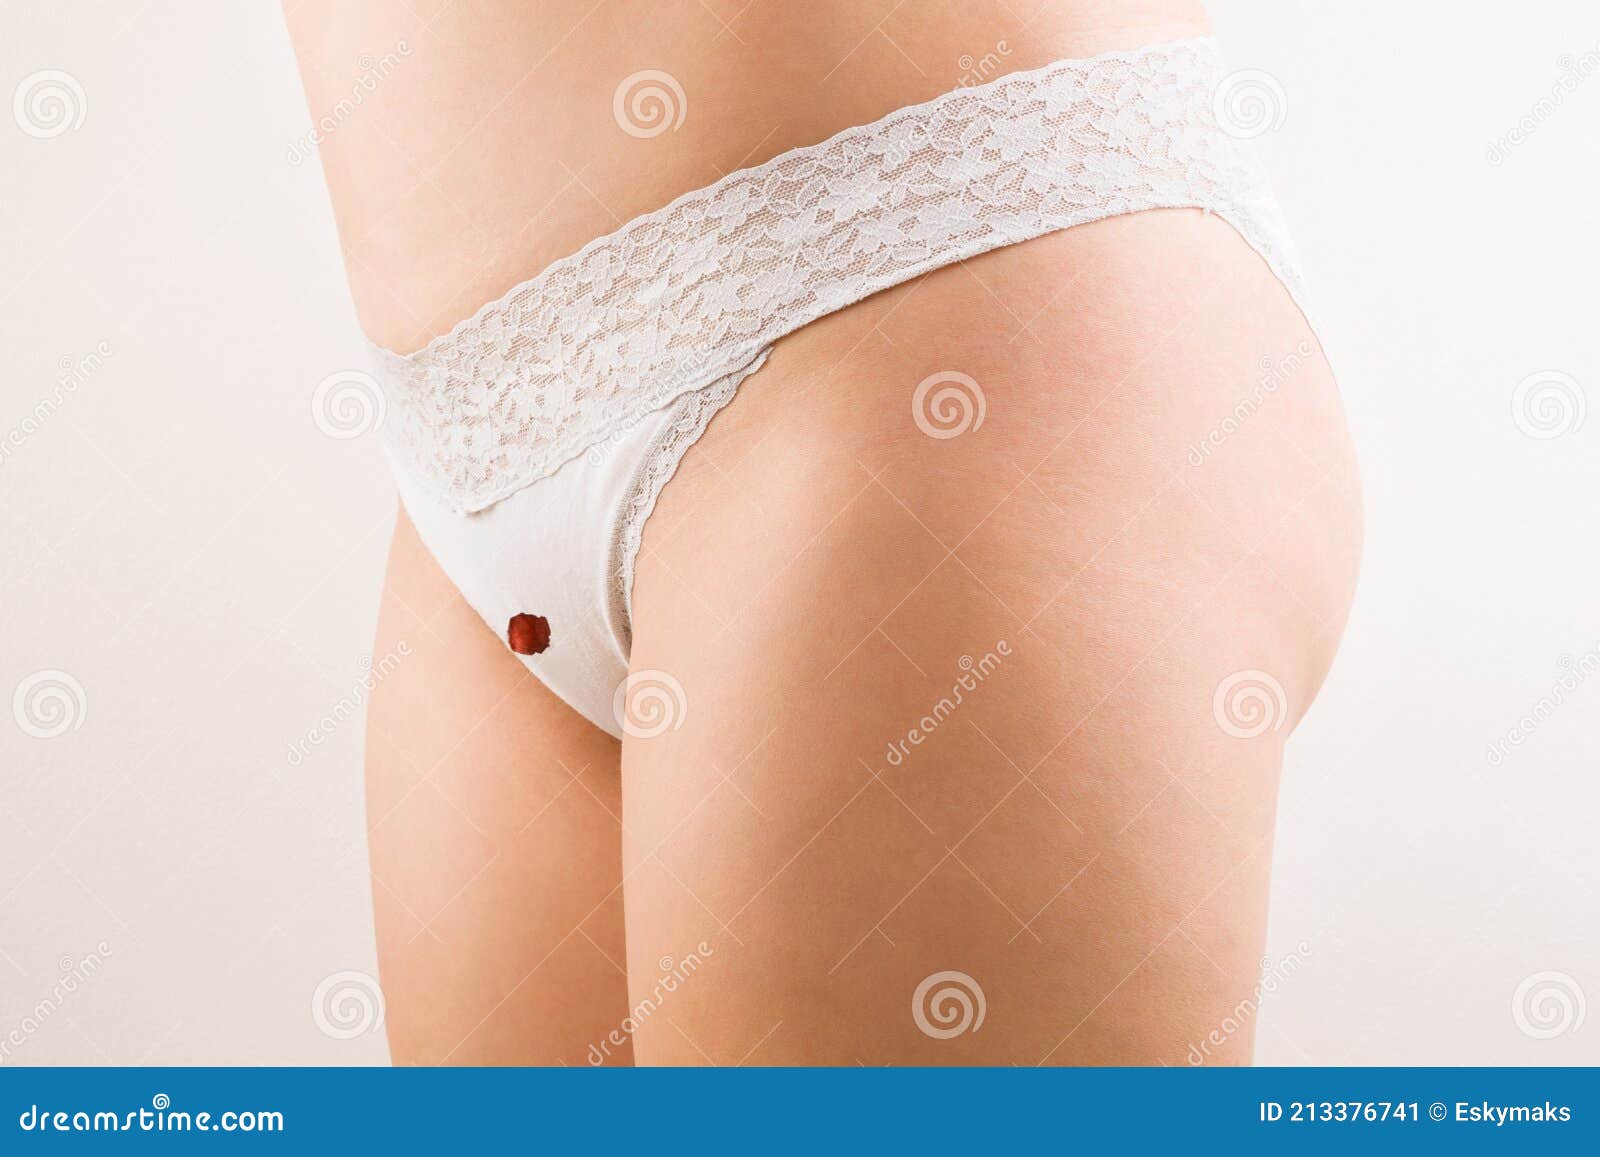 Beautiful Girl Blood Spot Panties First Period Stock Photo by ©eskymaks  457496150